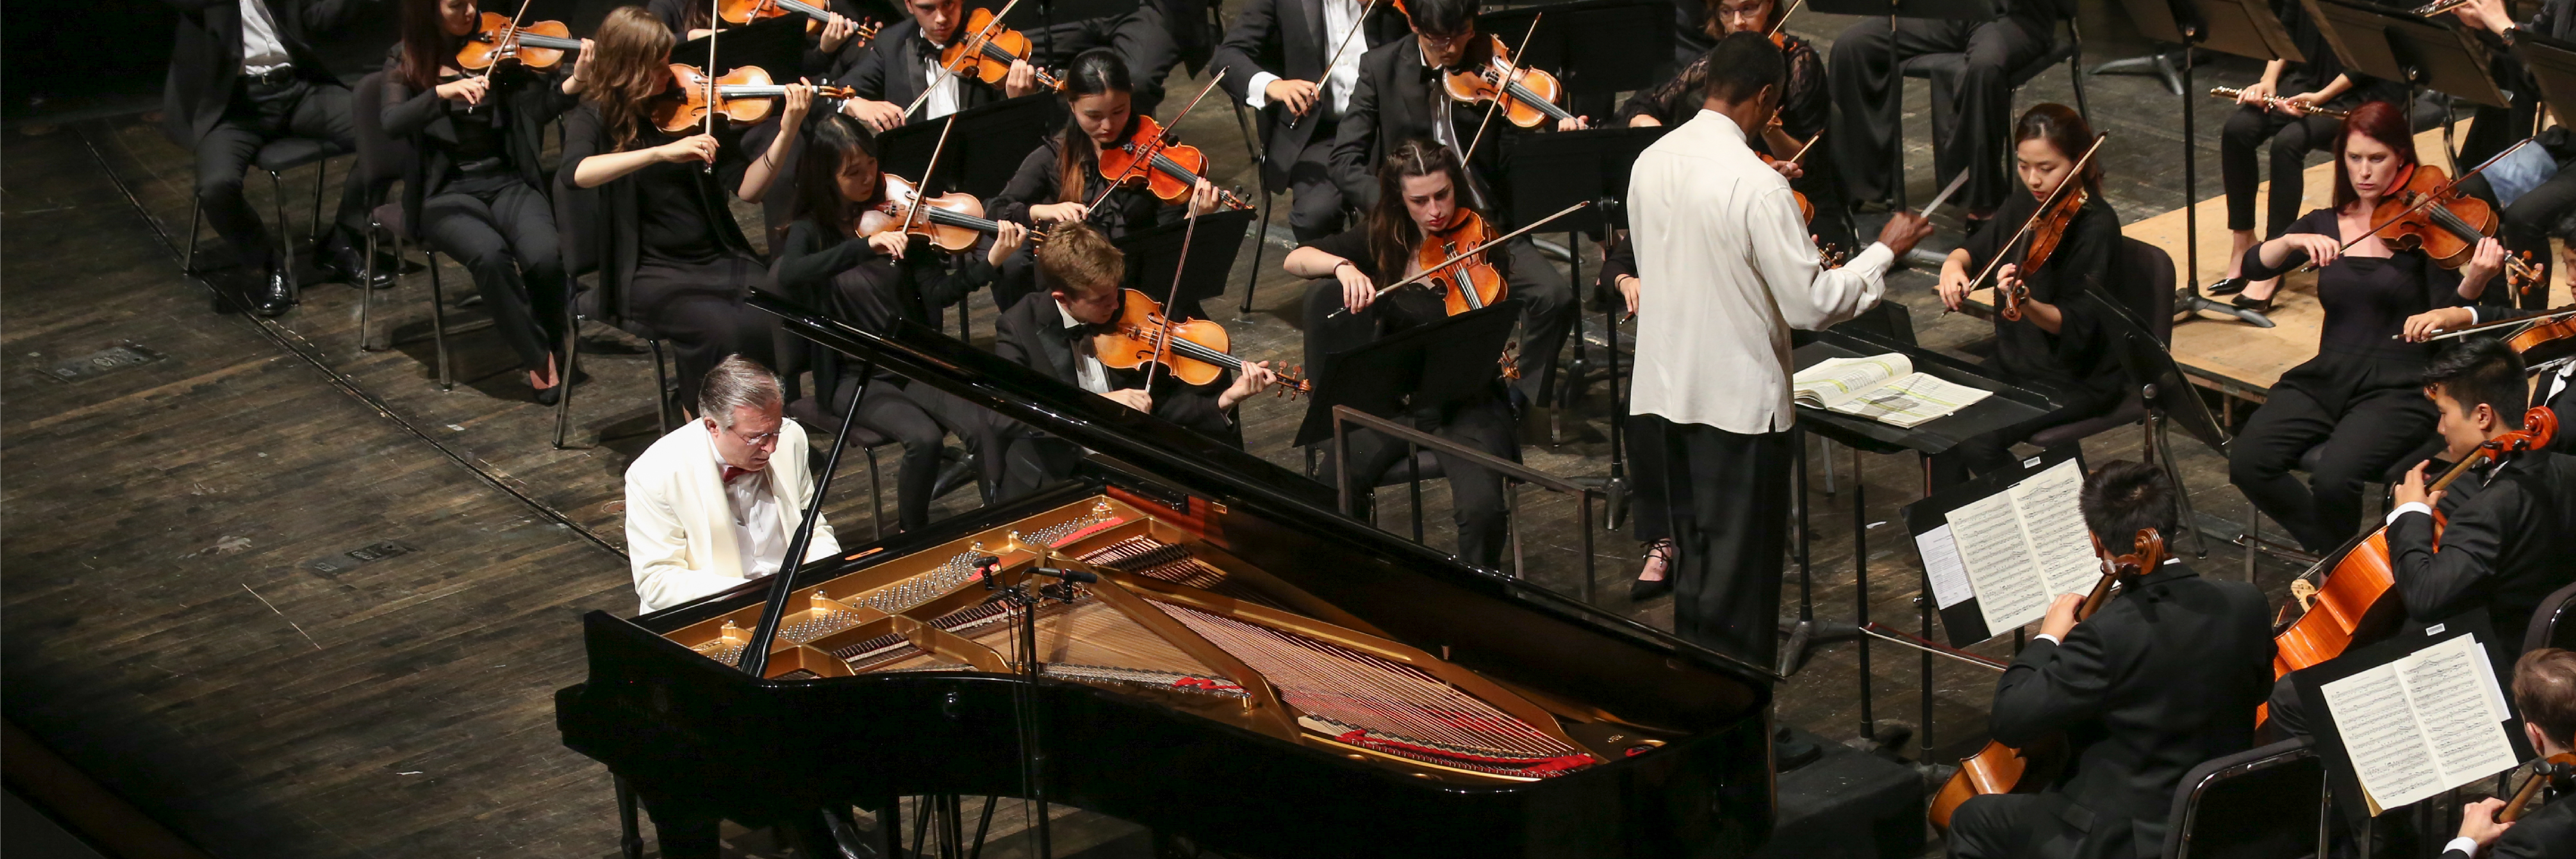 Image of Arnaldo Cohen playing the piano on stage with the Summer Philharmonic